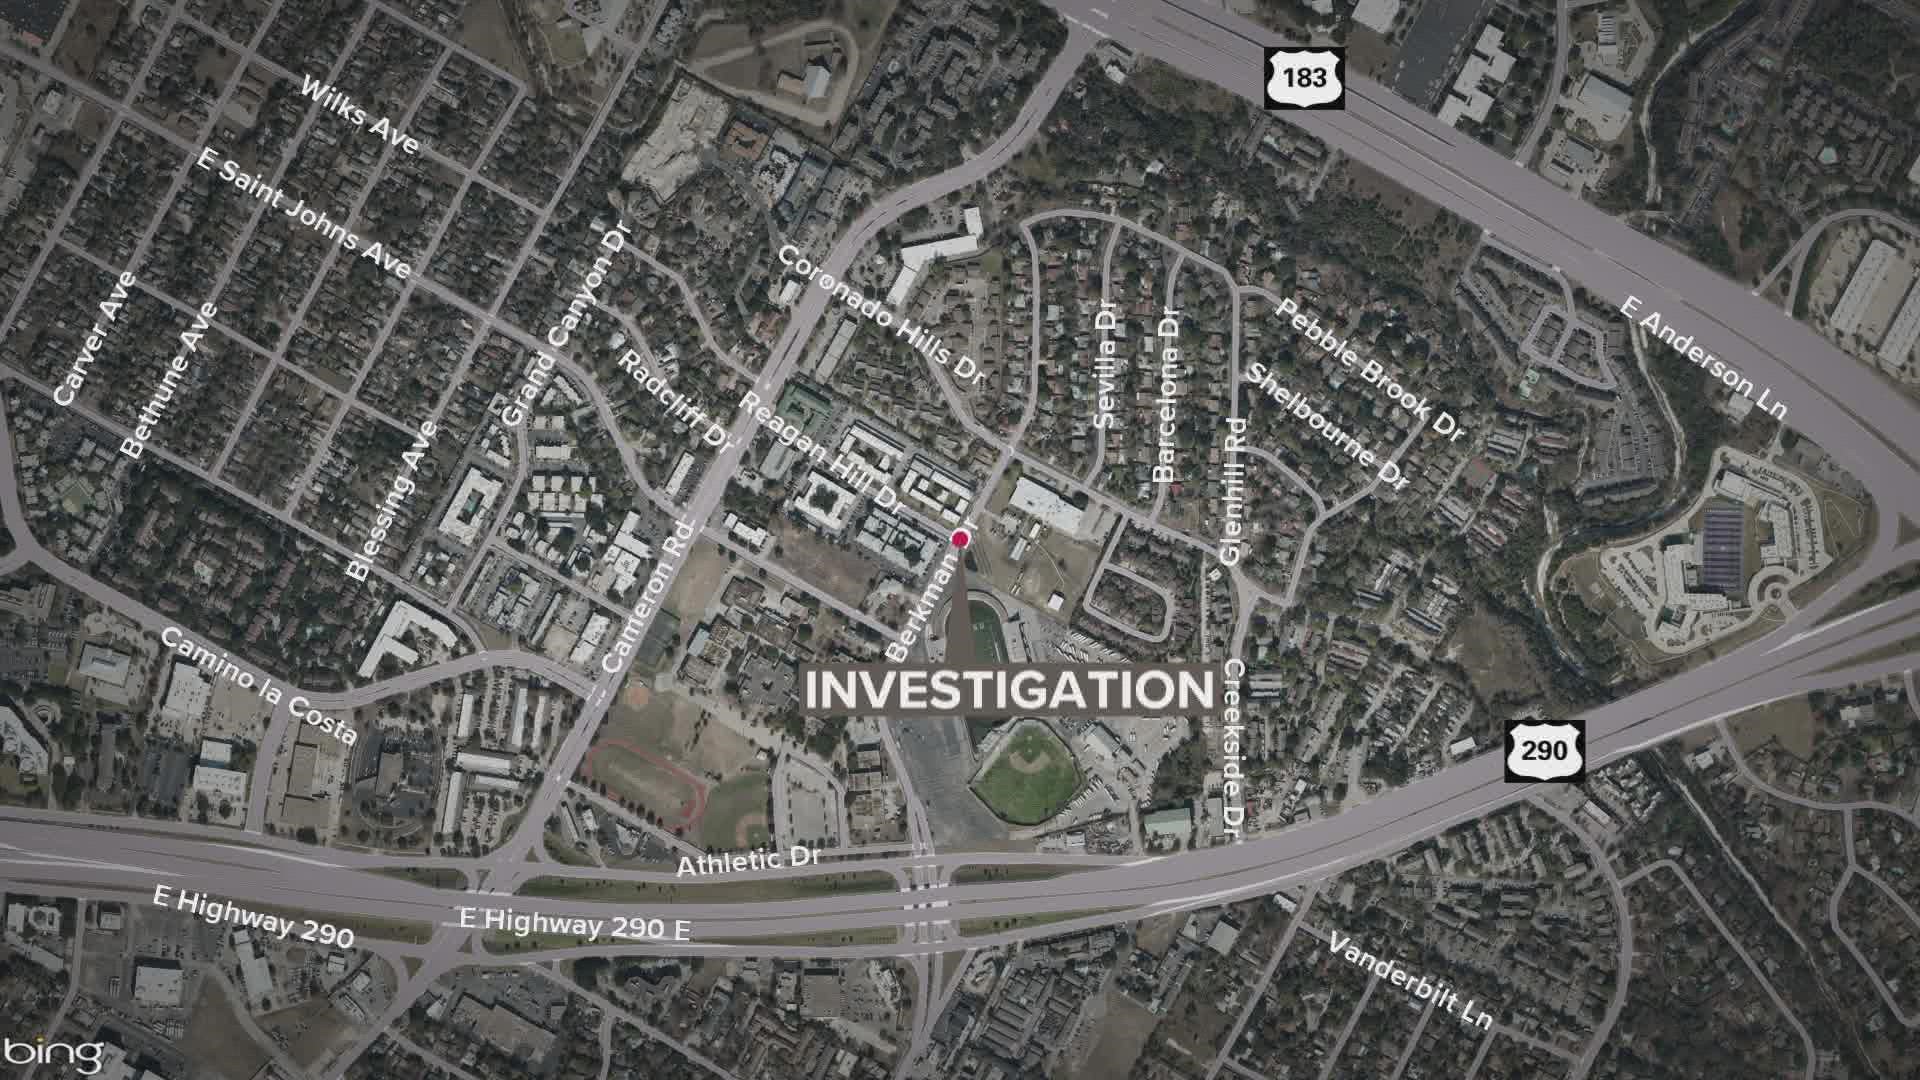 The Austin Police Department is investigating a shooting death near the Coronado Hills area of northeast Austin.